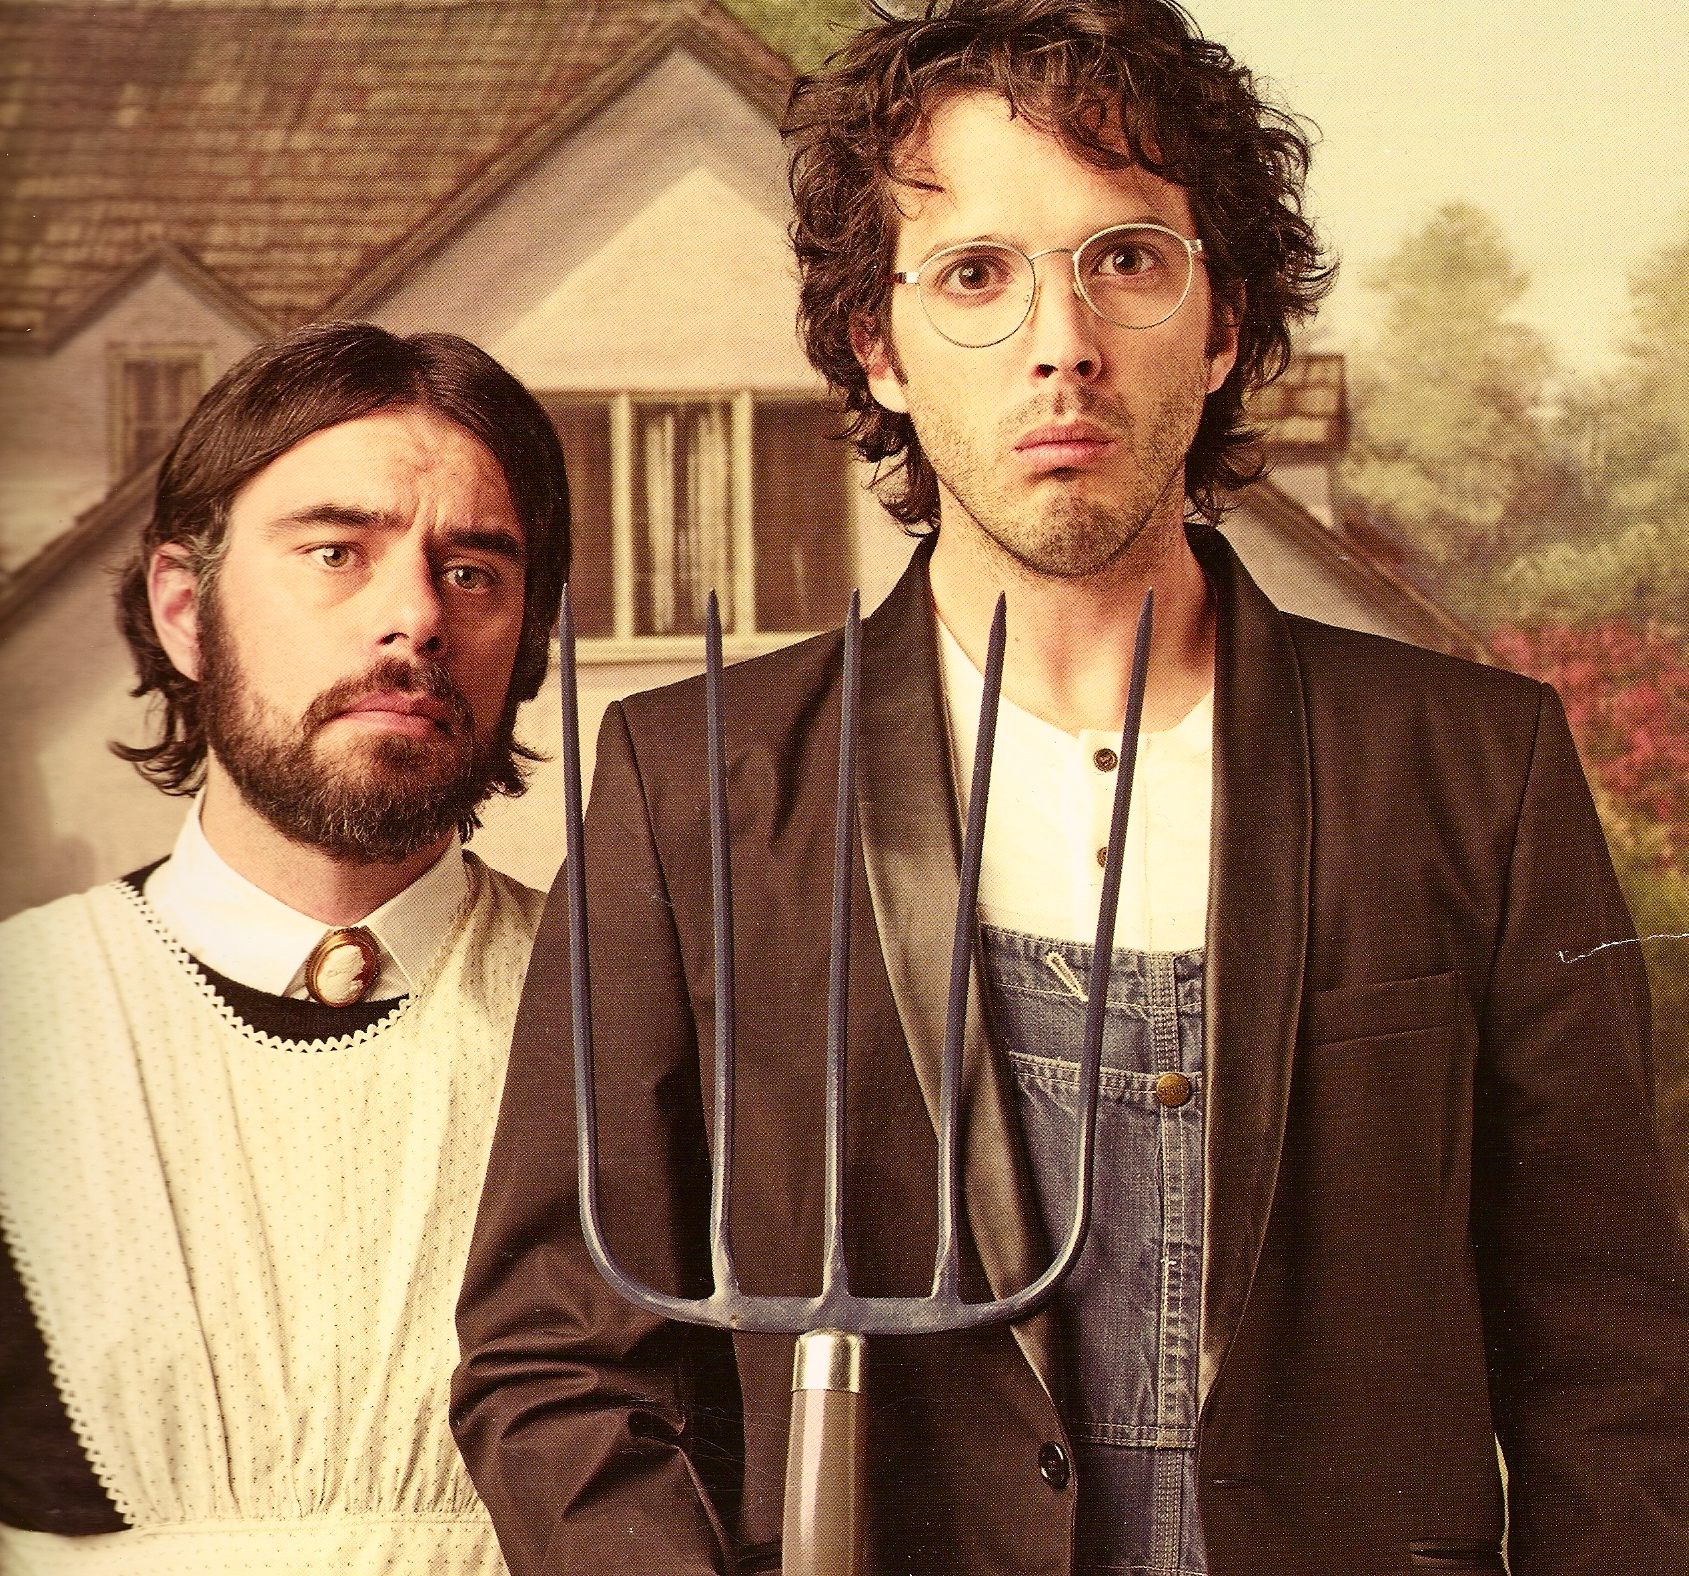 Flight Of The Conchords #7